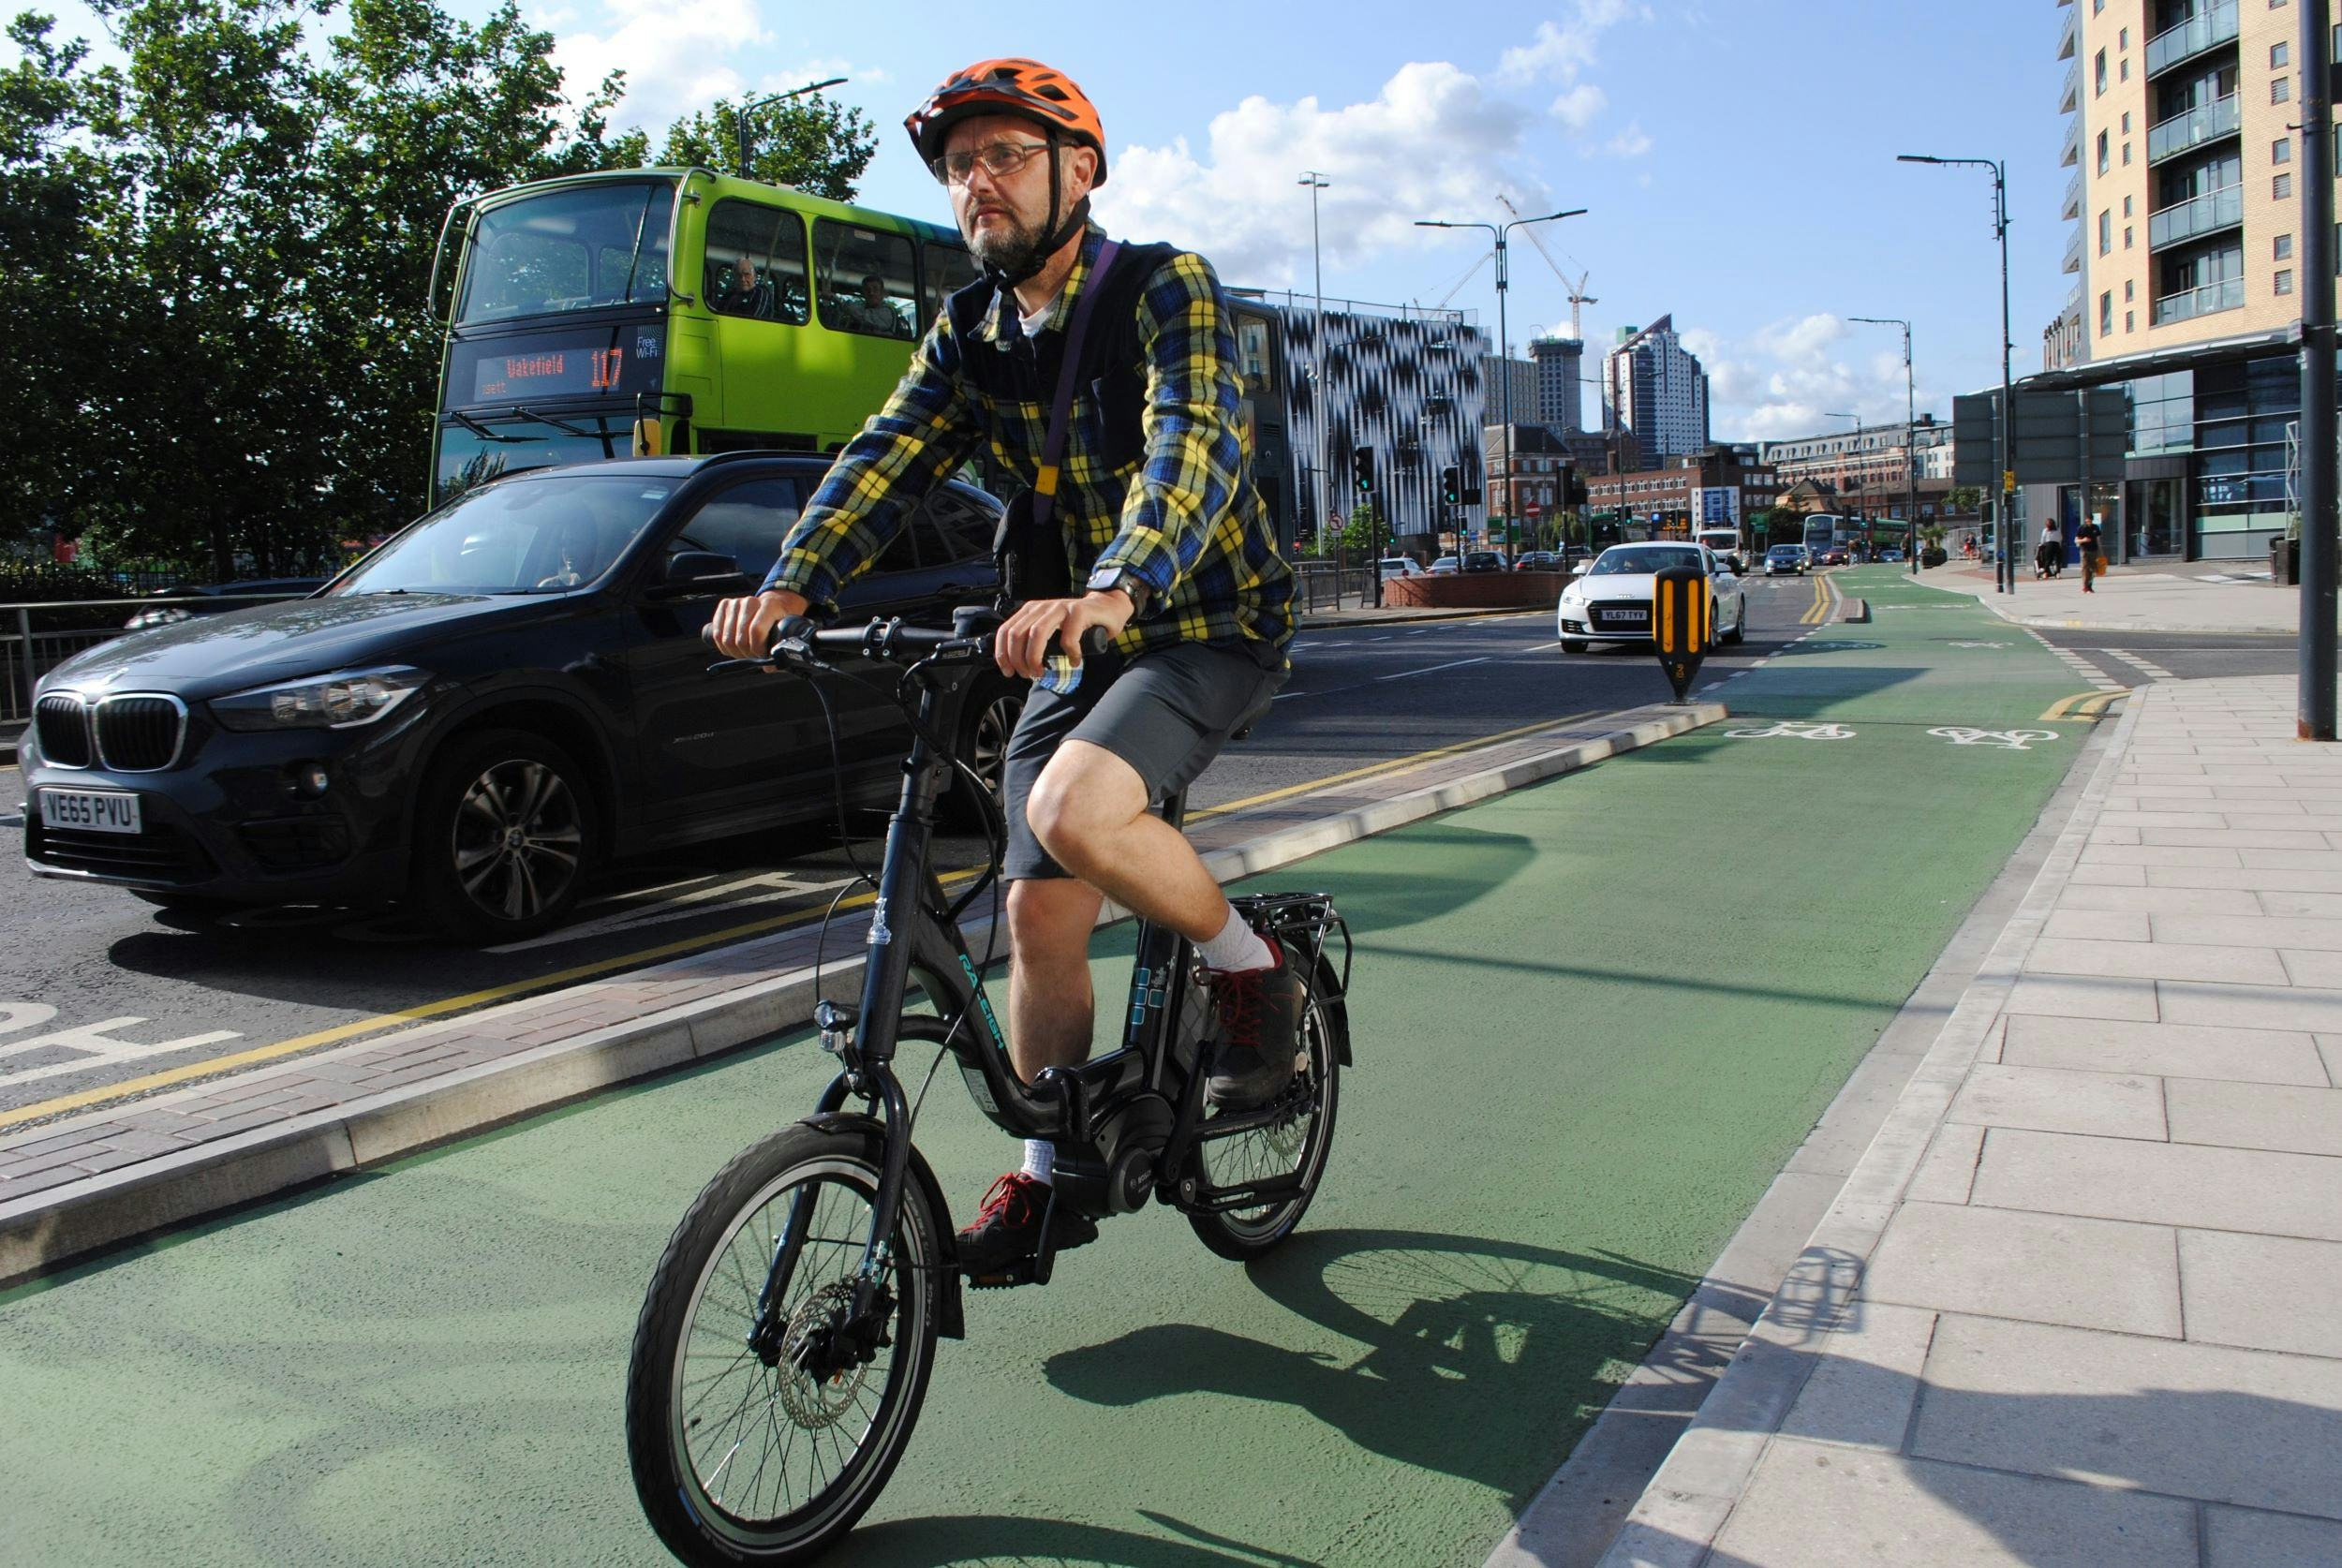 €2.24 billion worth of investment was signalled by the government in May 2020, raising the prospect of Dutch levels of investment in cycling infrastructure. – Photo Richard Peace 